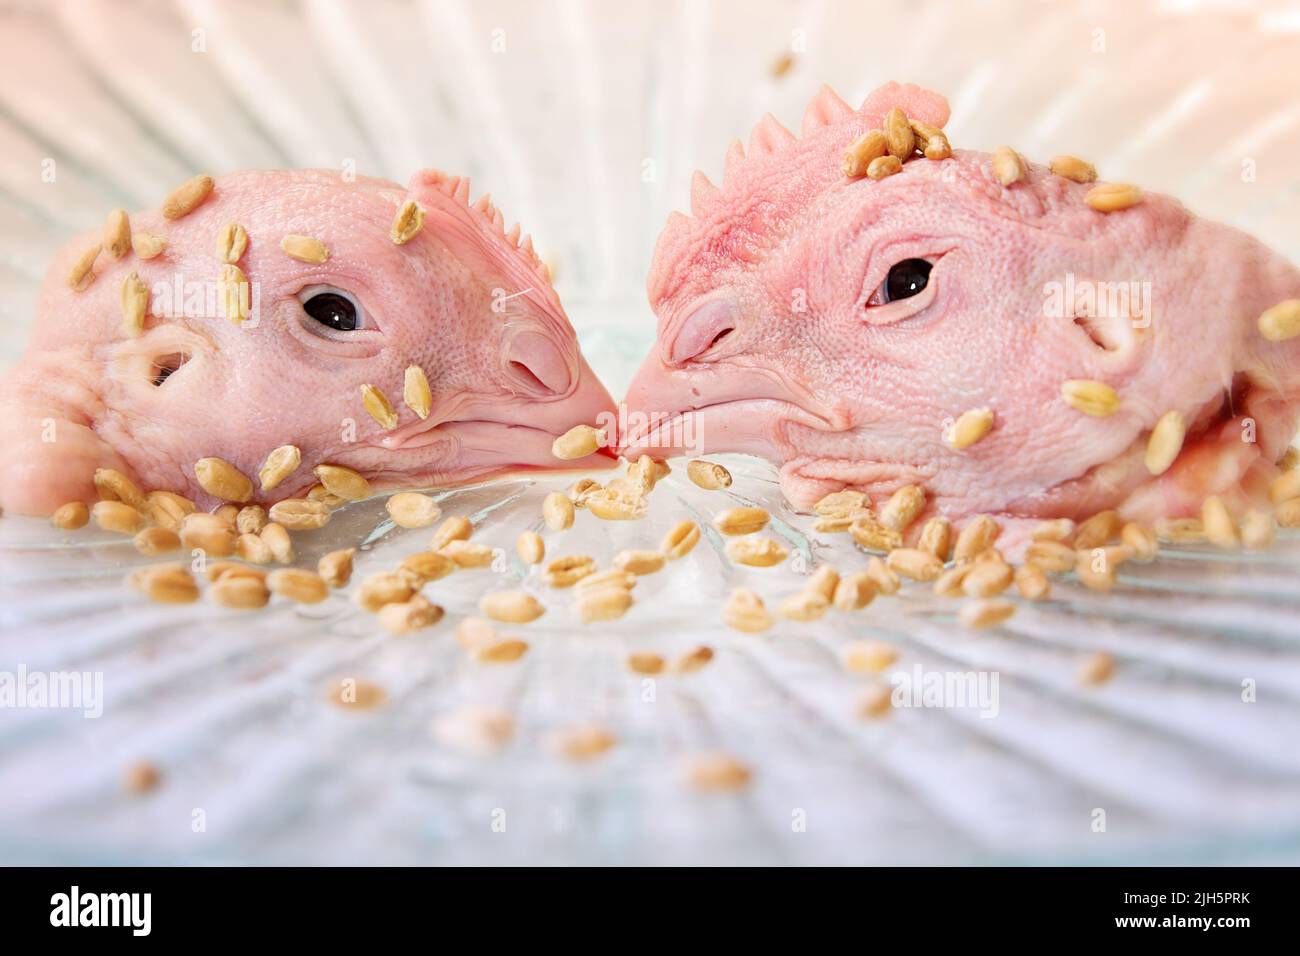 Still life with the pair of killed chickens Stock Photo